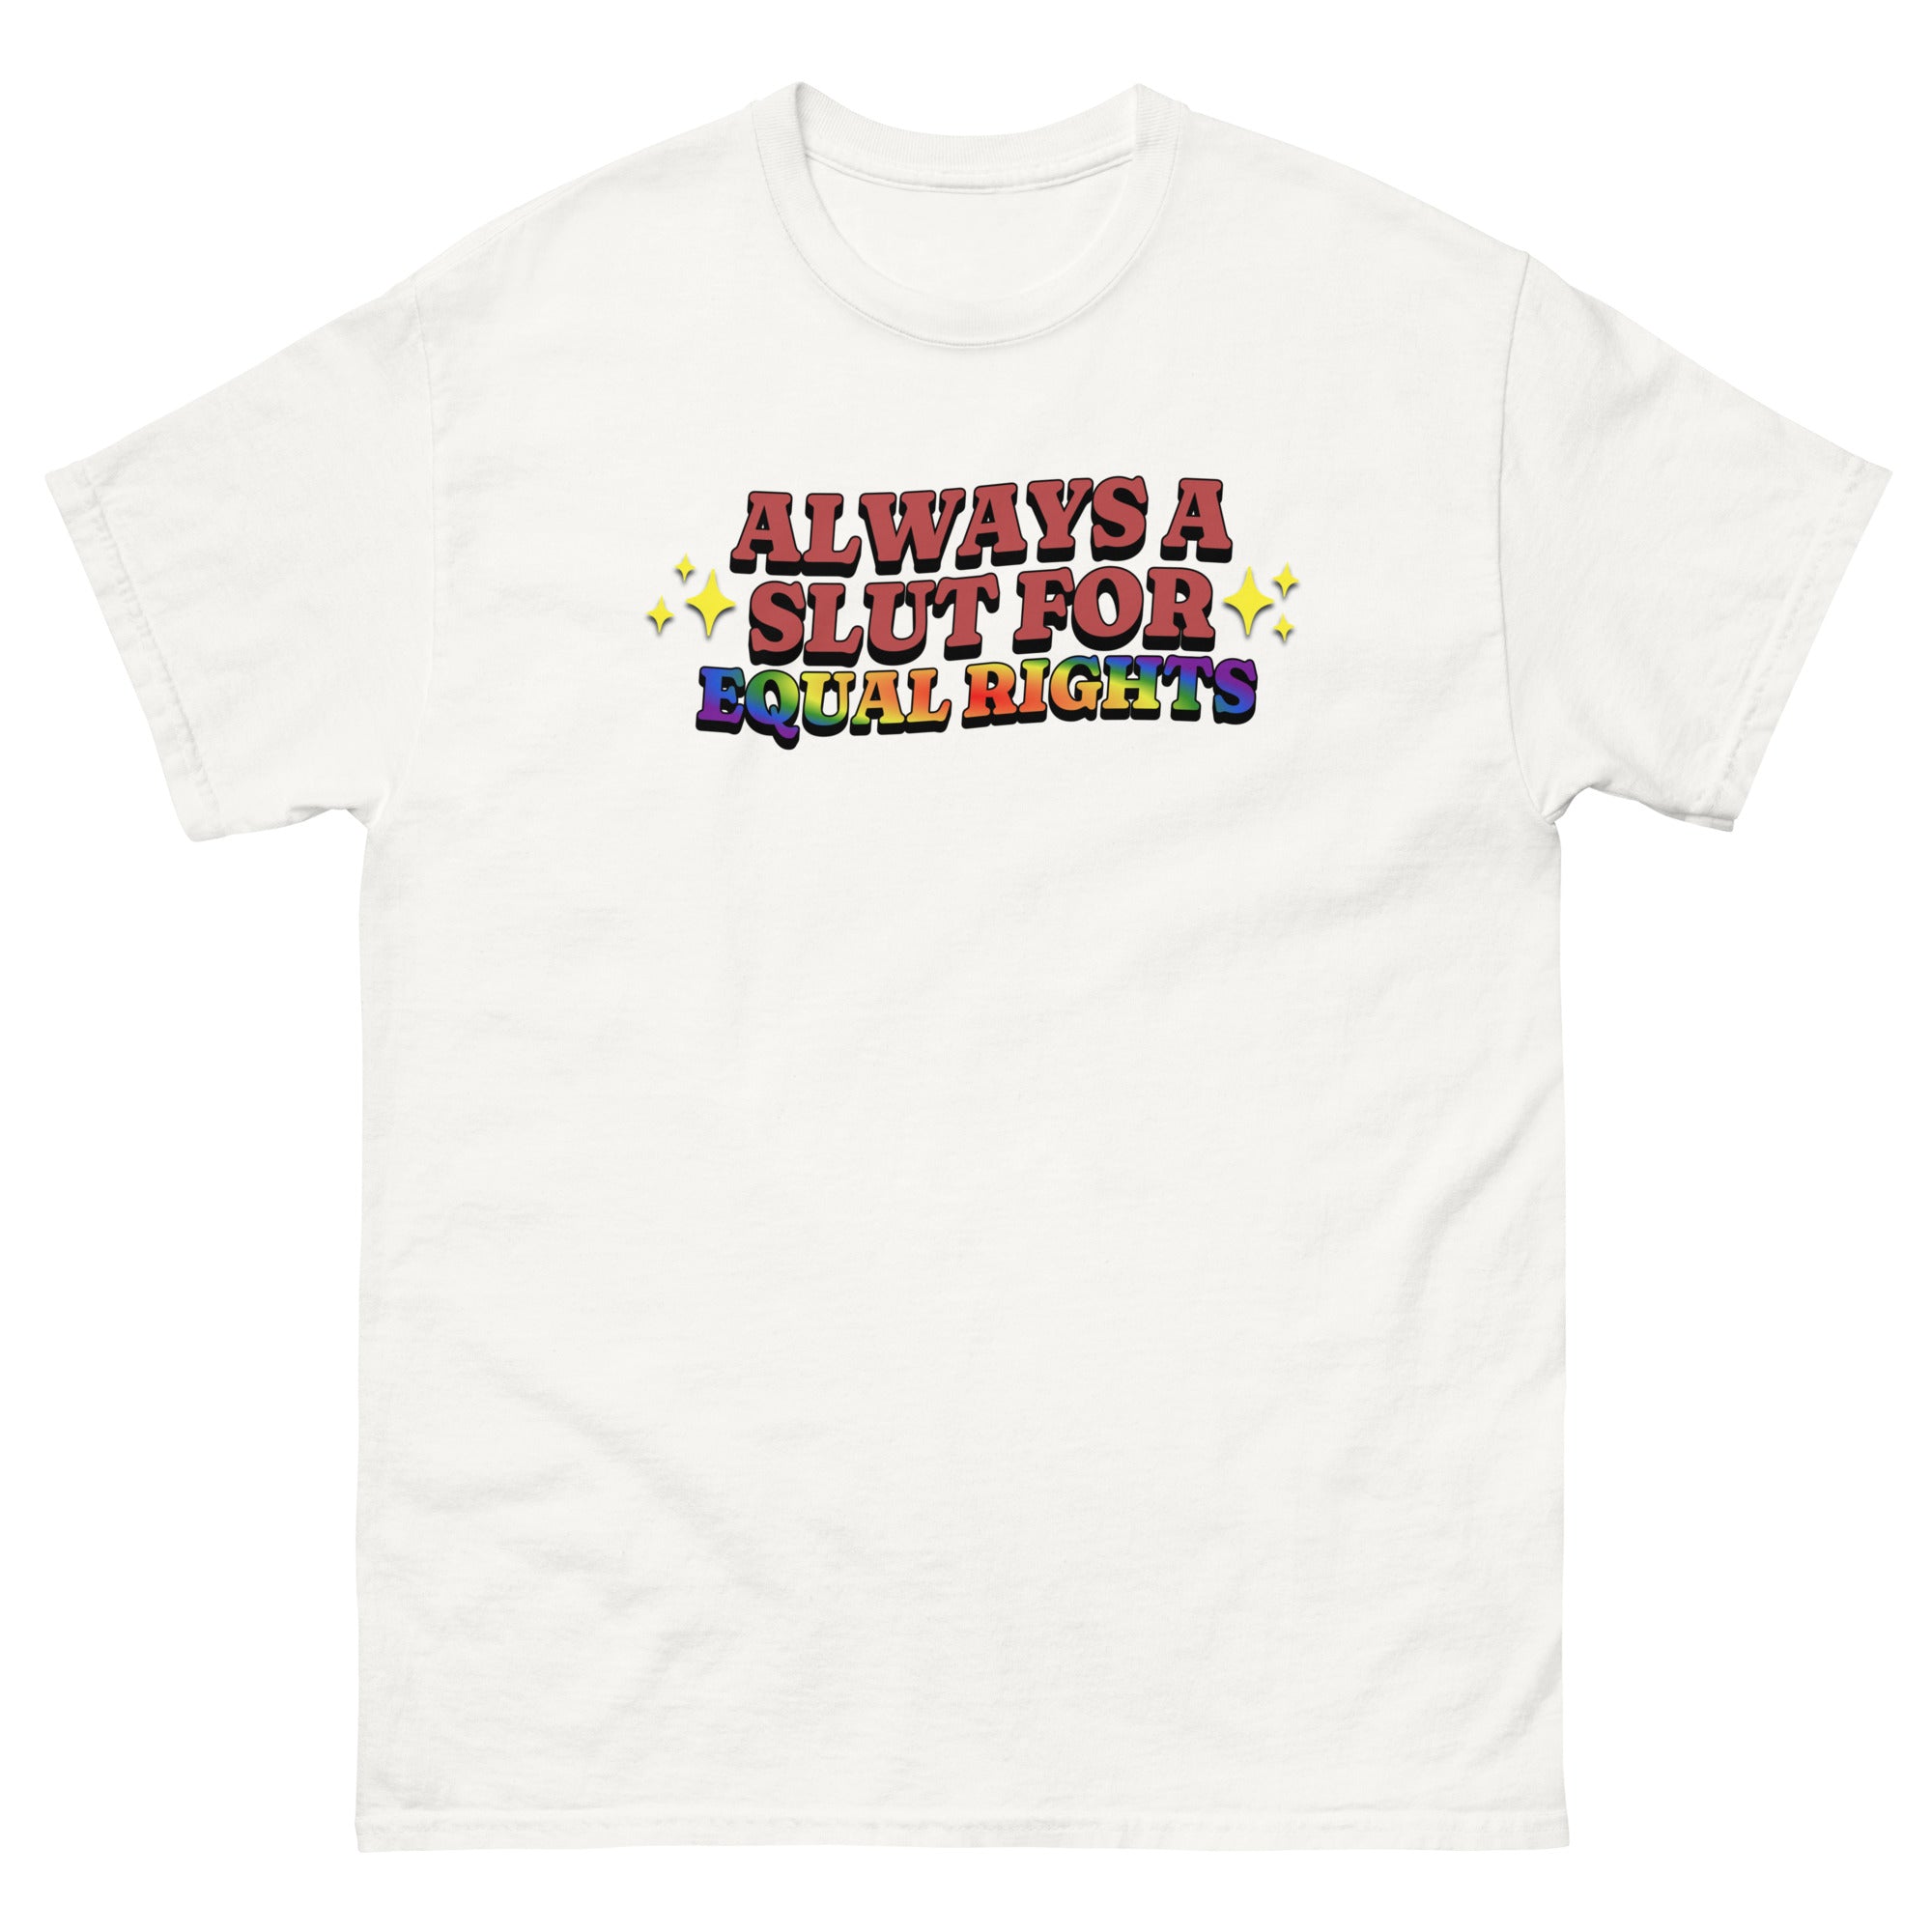 Always A Slut For Equal Right Pride T Shirt